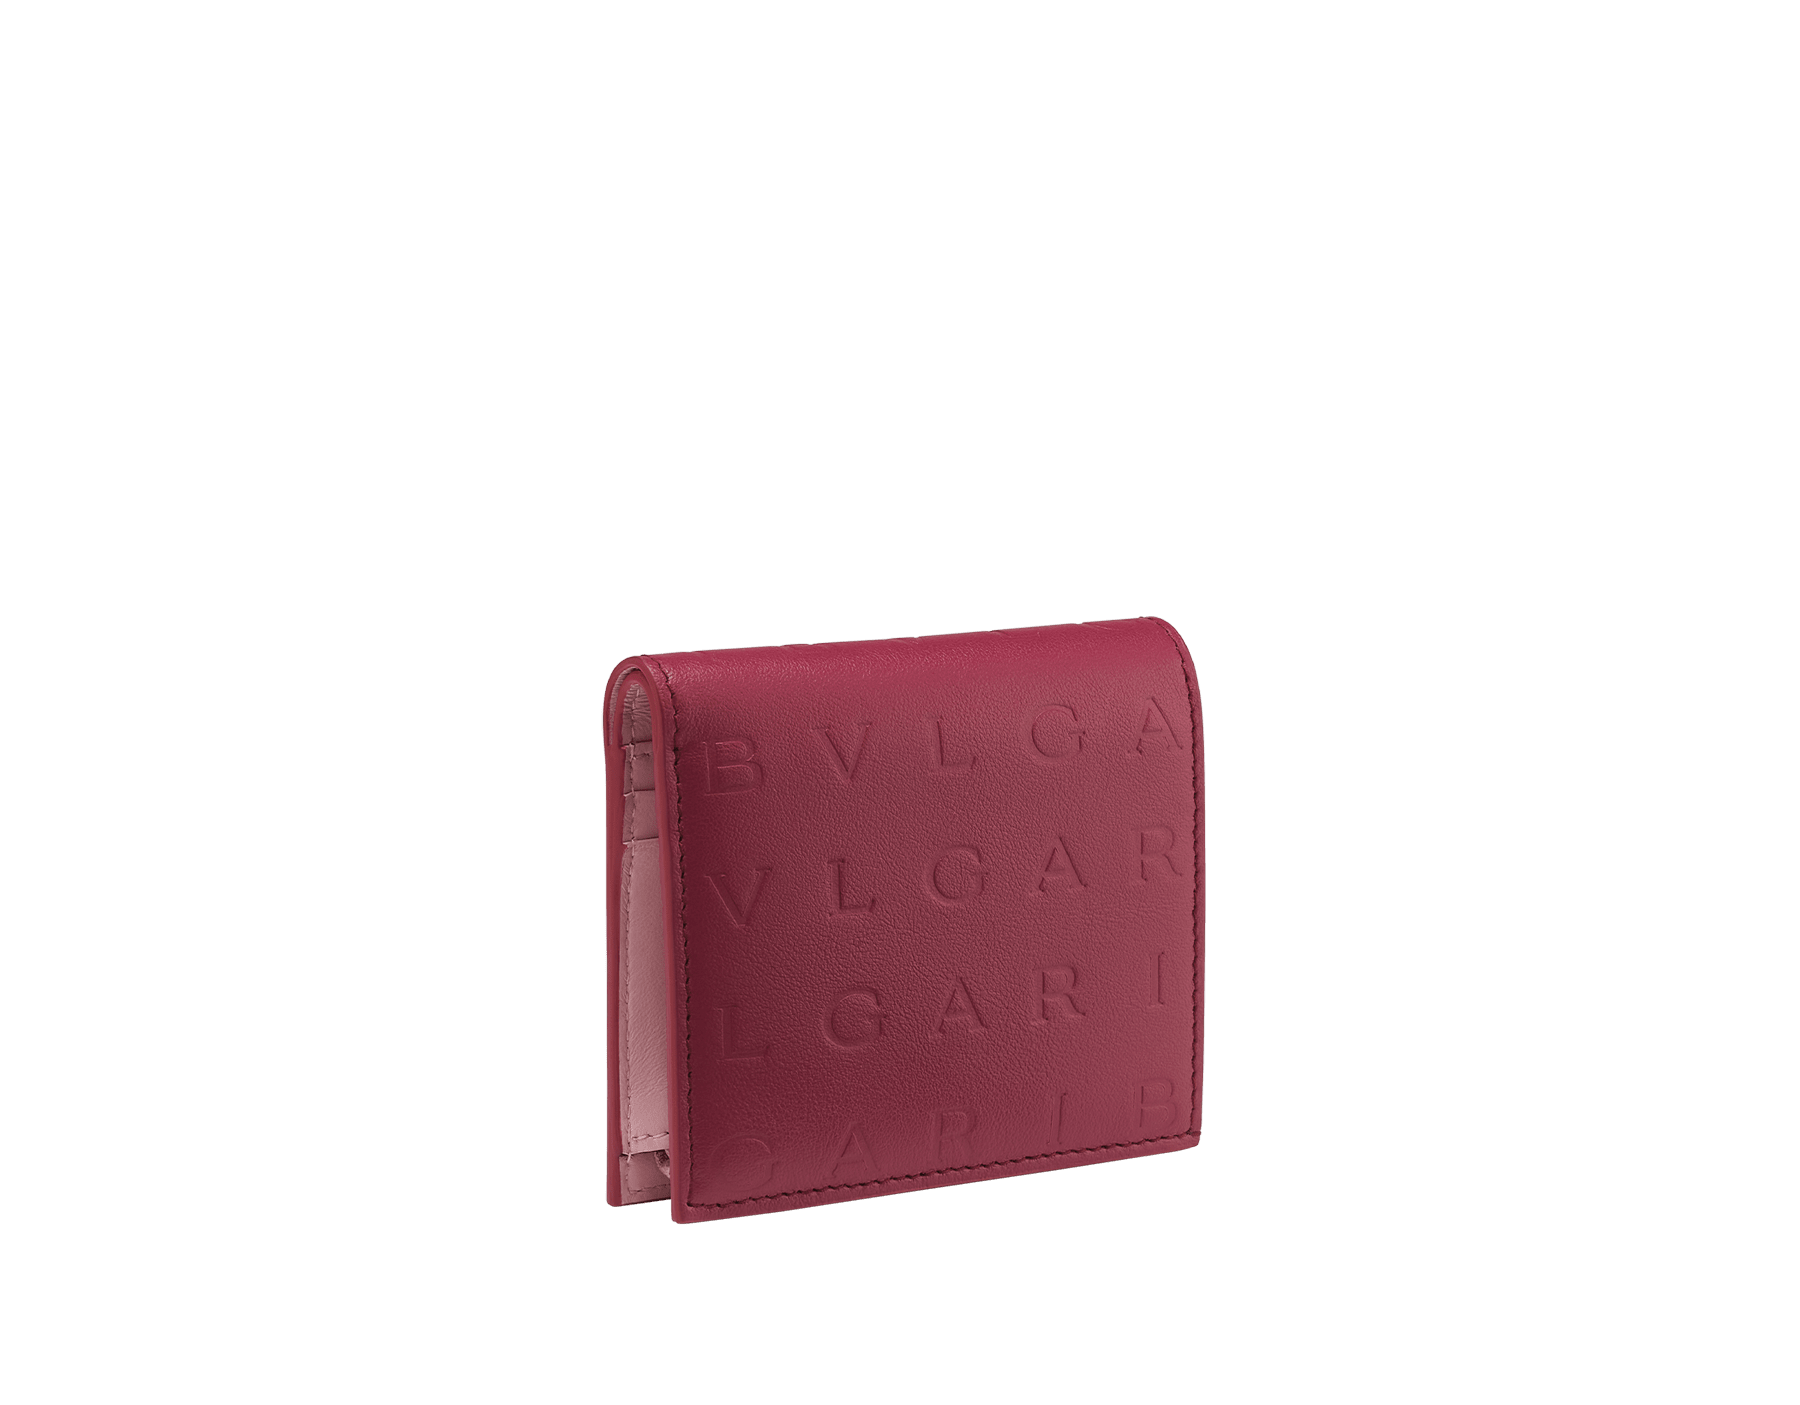 Bulgari Logo compact wallet in primrose quartz pink calf leather with hot-stamped Infinitum pattern all over and anemone spinel pinkish-red nappa leather interior. Light gold-plated brass hardware and press-stud closure. BVL-COMPACTWLTa image 1